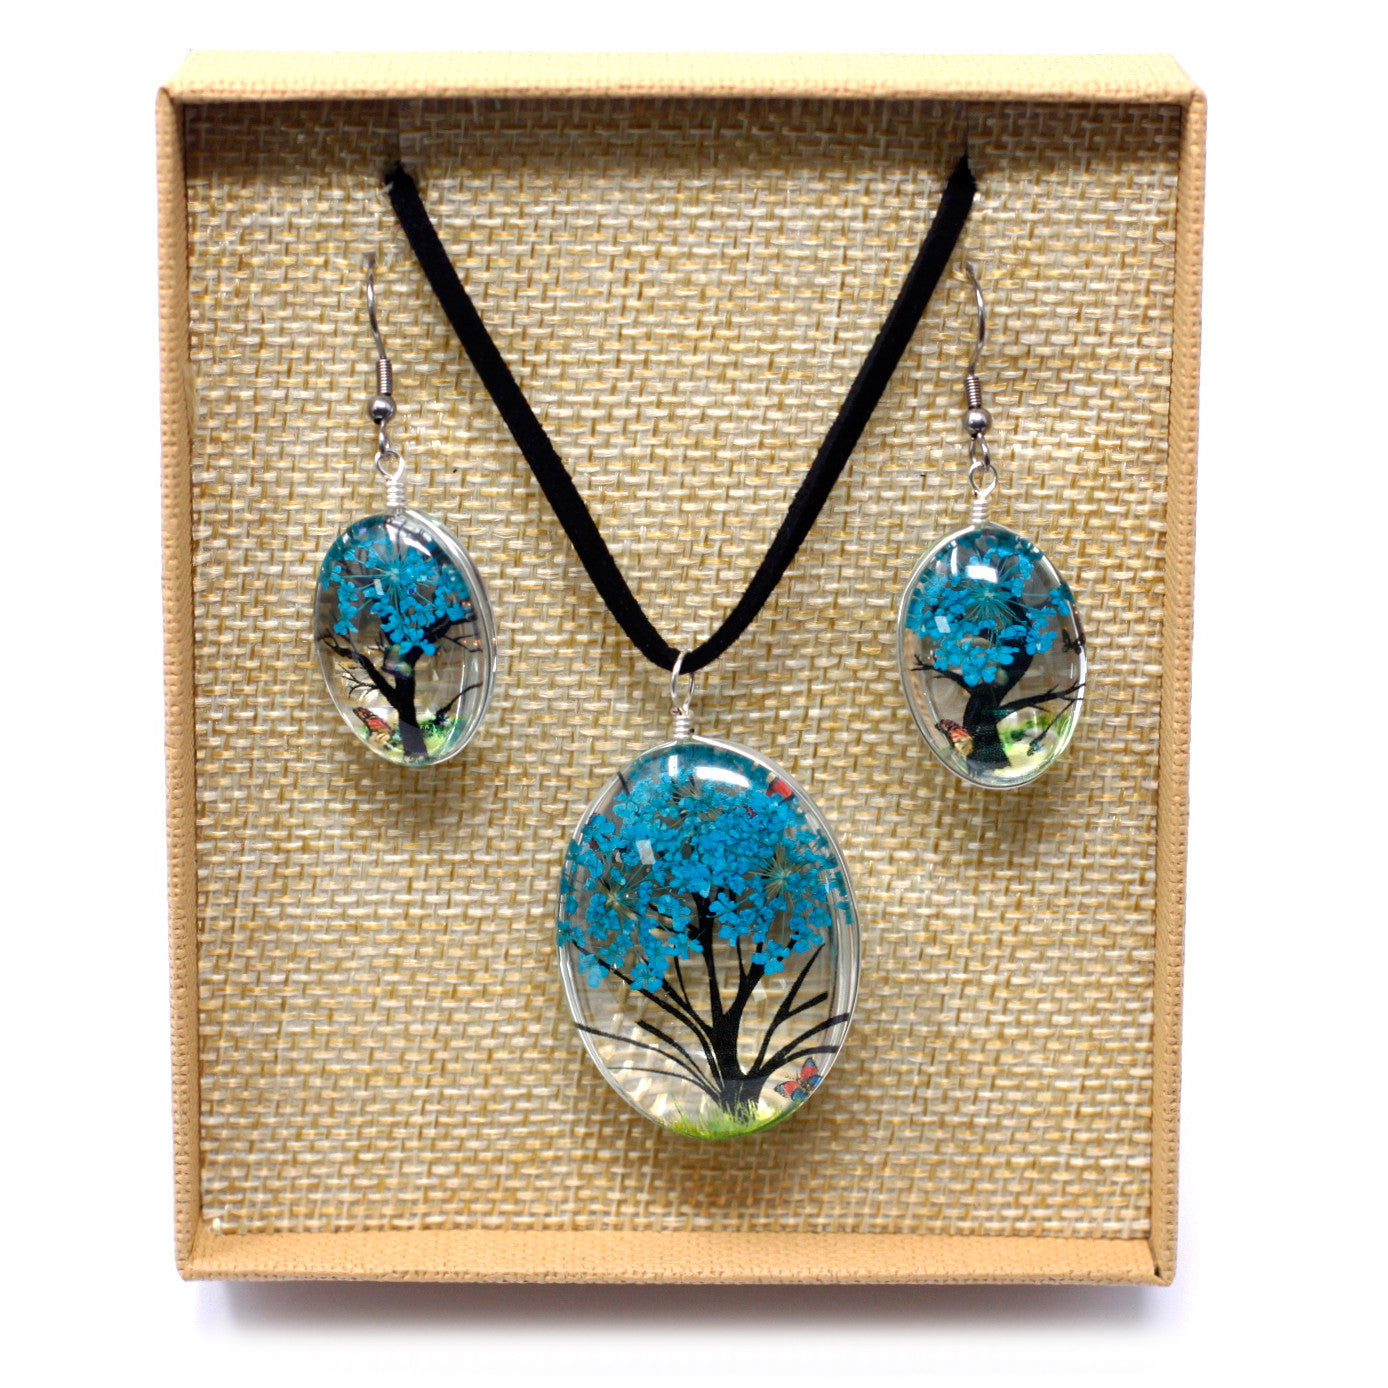 Pressed Flowers Necklaces - Tree of Life set - Teal